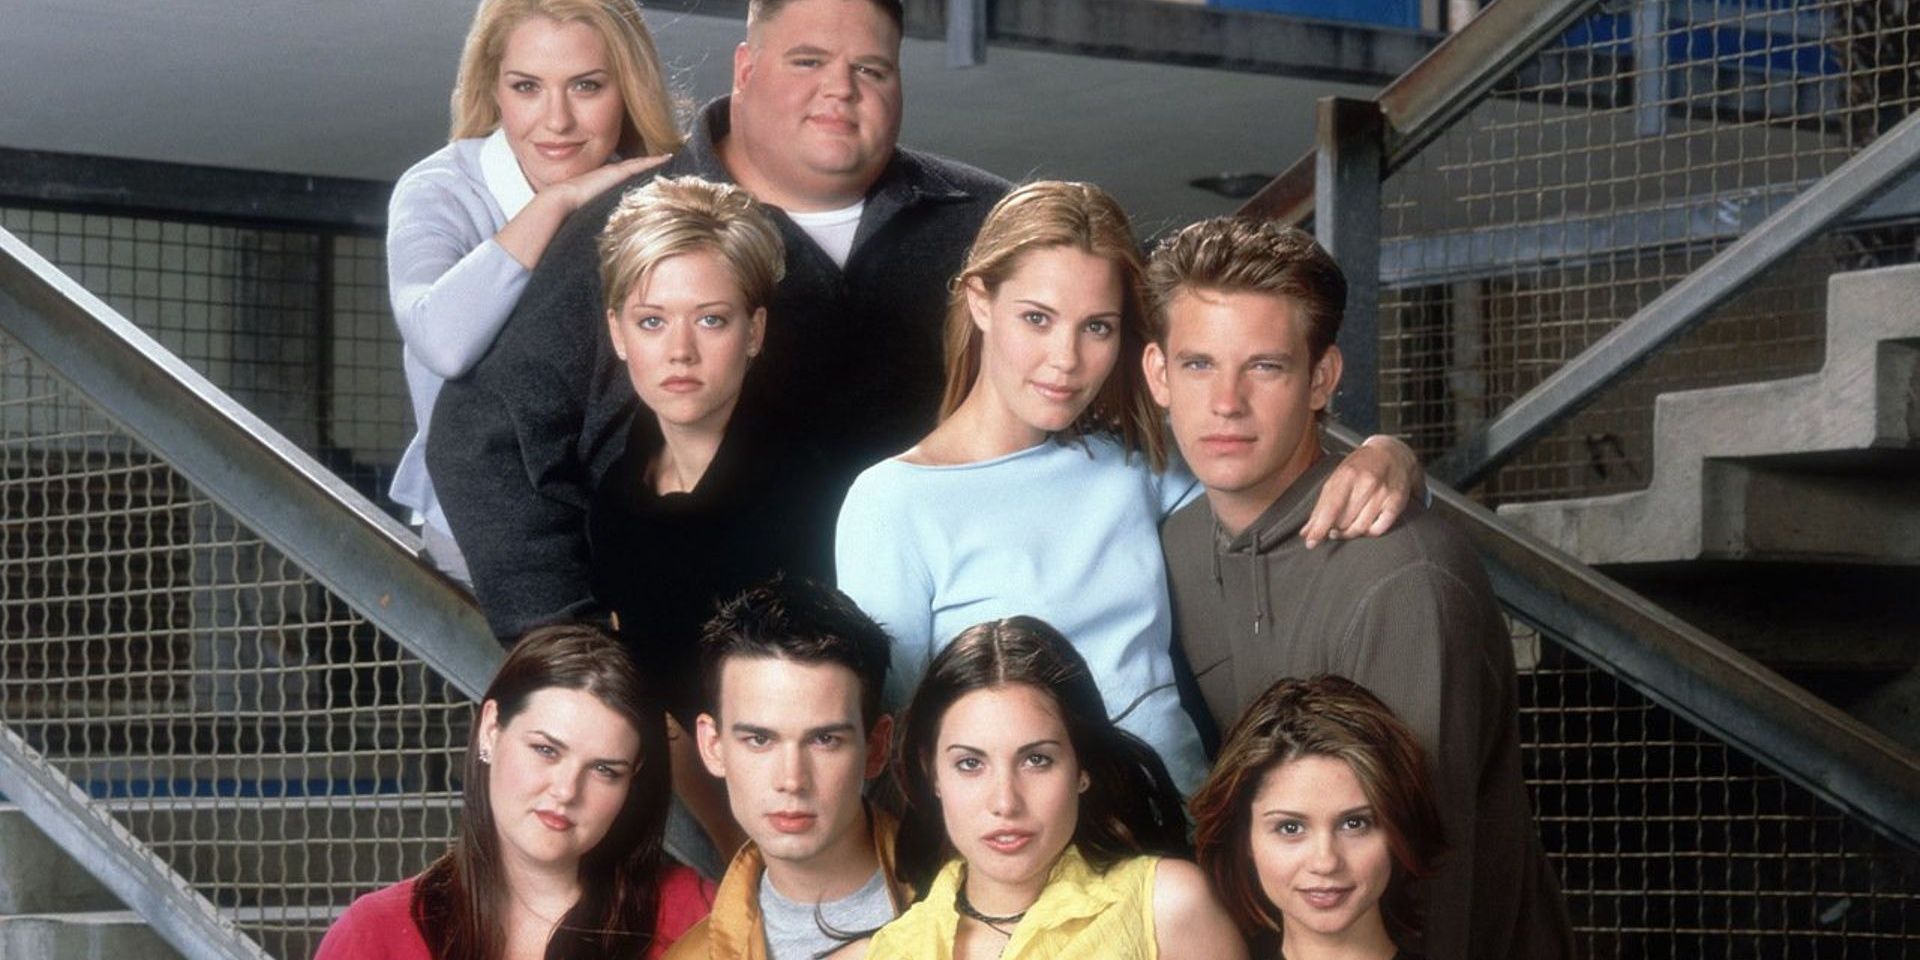 Leslie Bibb As Brooke McQueen In Popular Along With The Rest Of The Cast